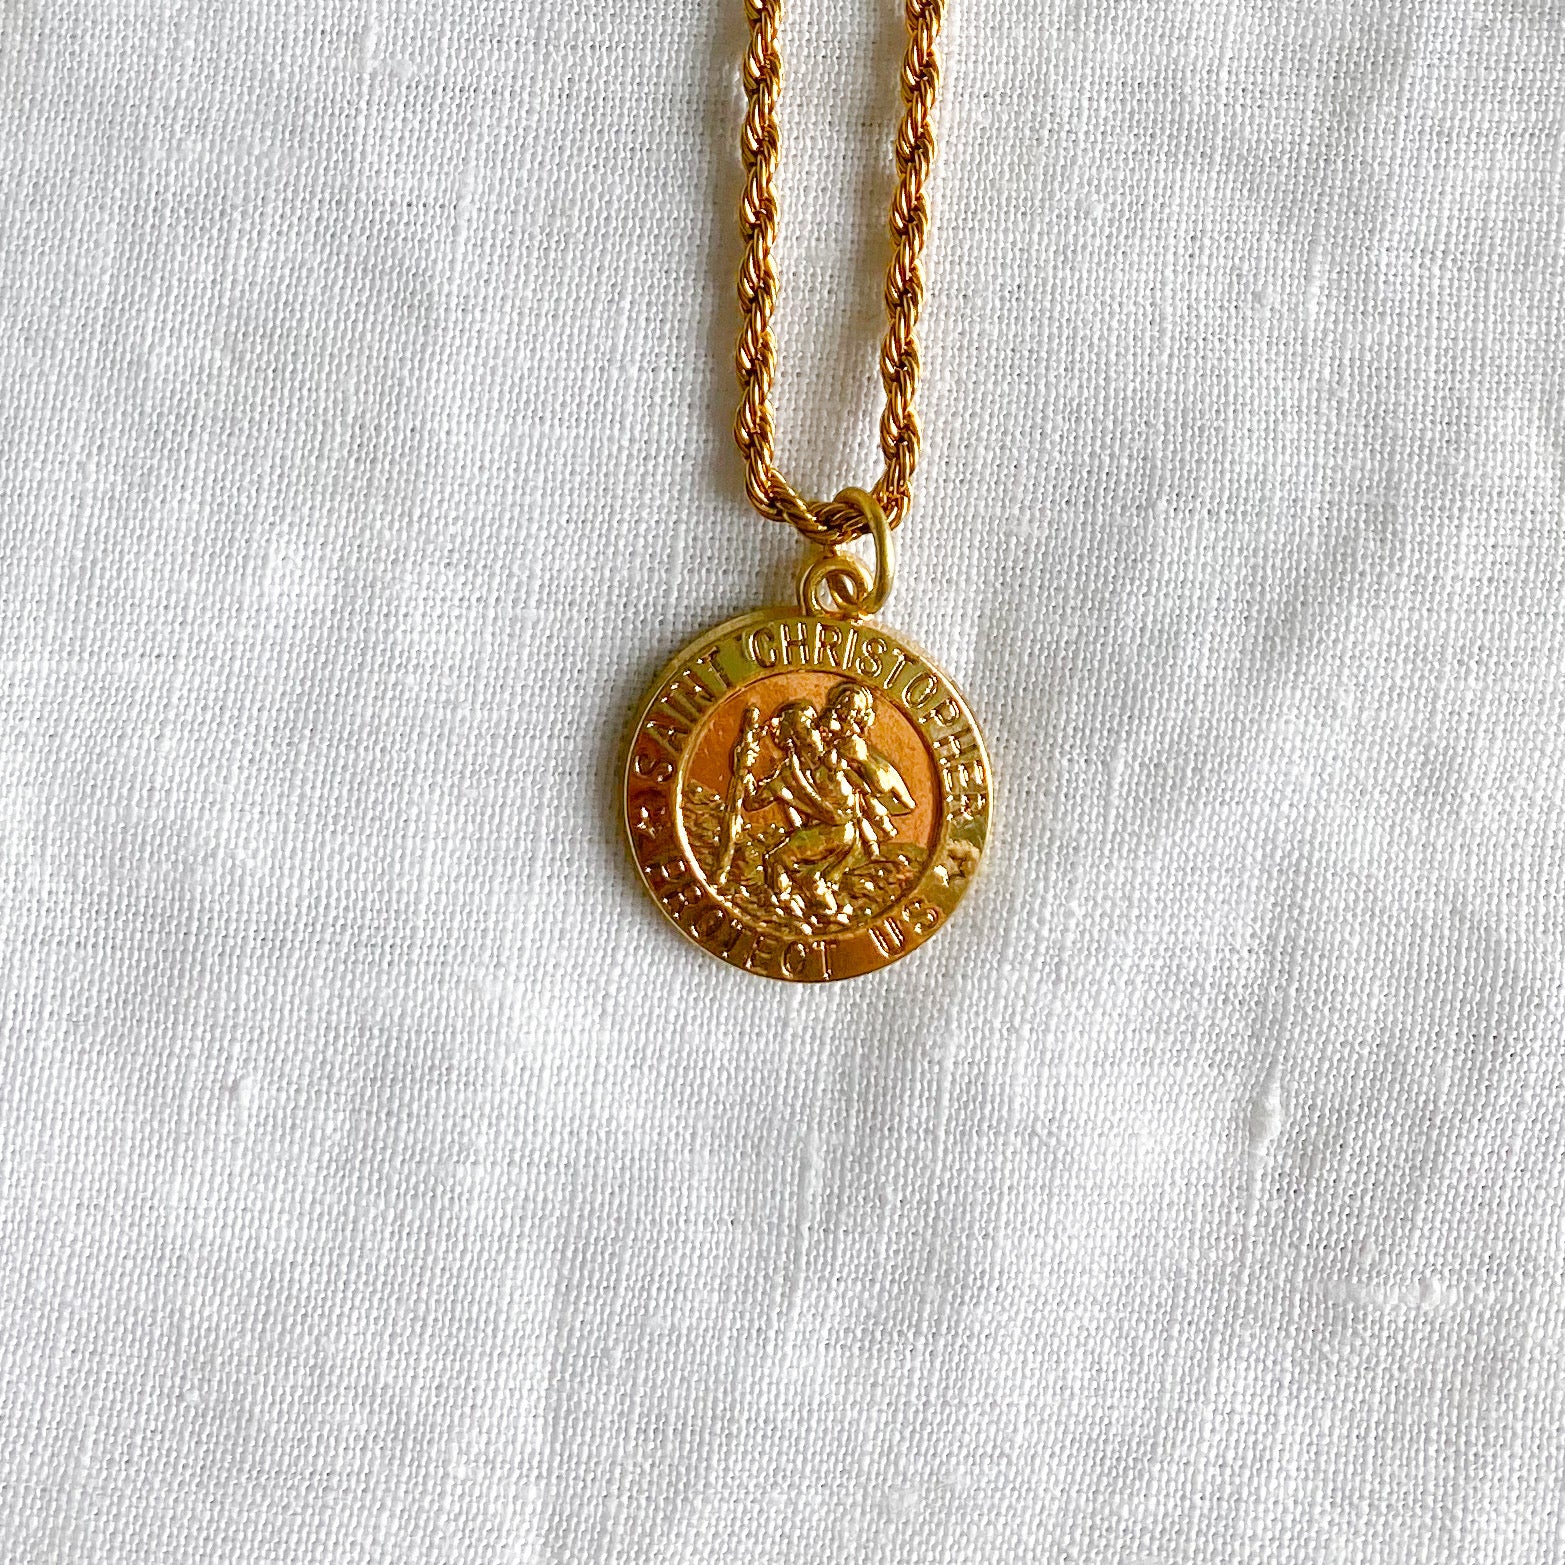 Bellestyle St. Christopher stainless steel gold double rope charm necklace protect us unisex style